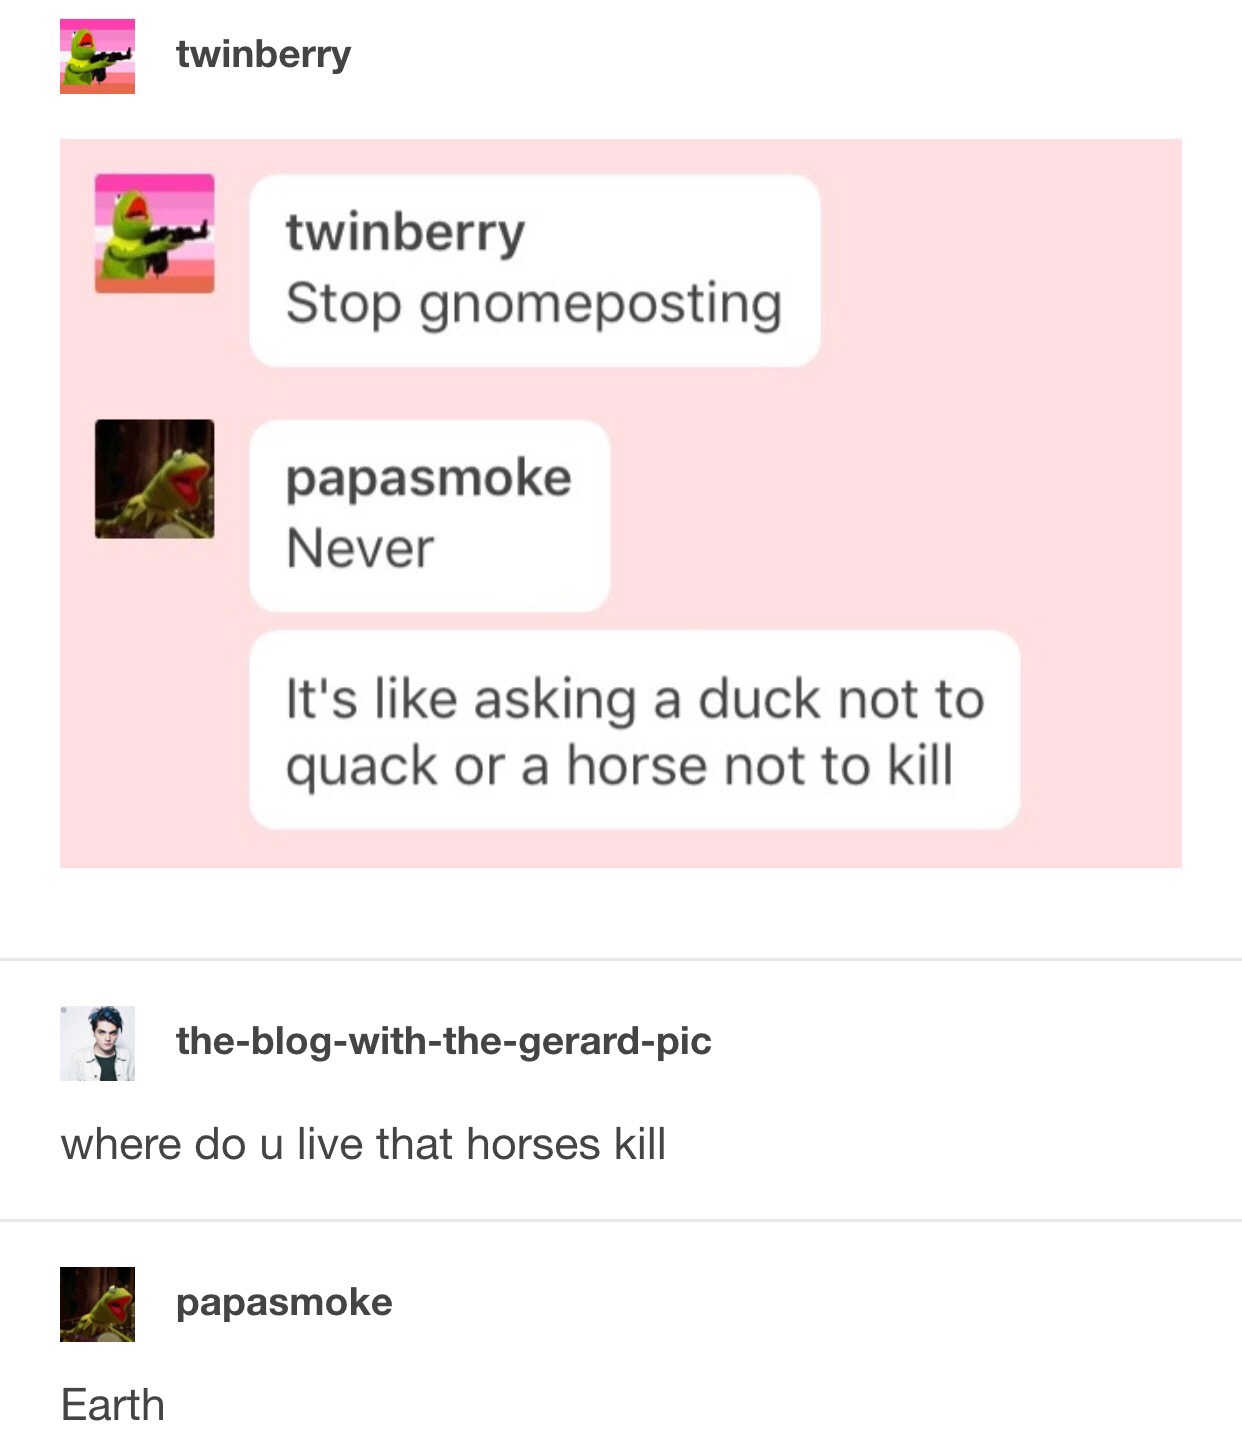 memes - document - twinberry twinberry Stop gnomeposting papasmoke Never It's asking a duck not to quack or a horse not to kill theblogwiththegerardpic where do u live that horses kill papasmoke Earth